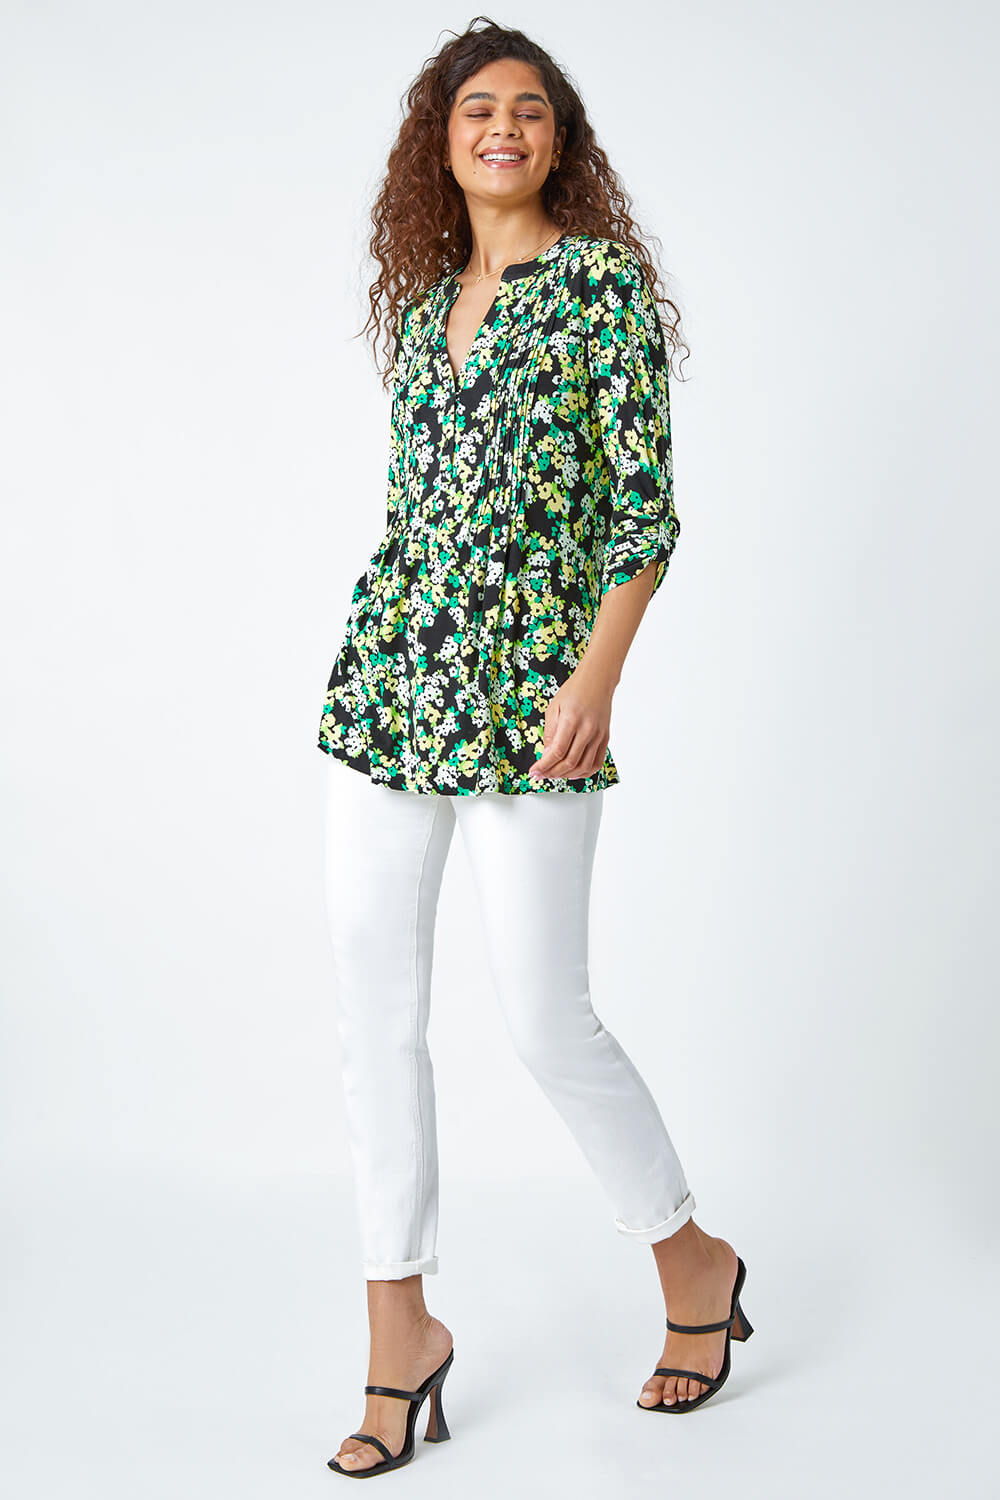 Green Floral Print Pintuck Stretch Top, Image 6 of 6